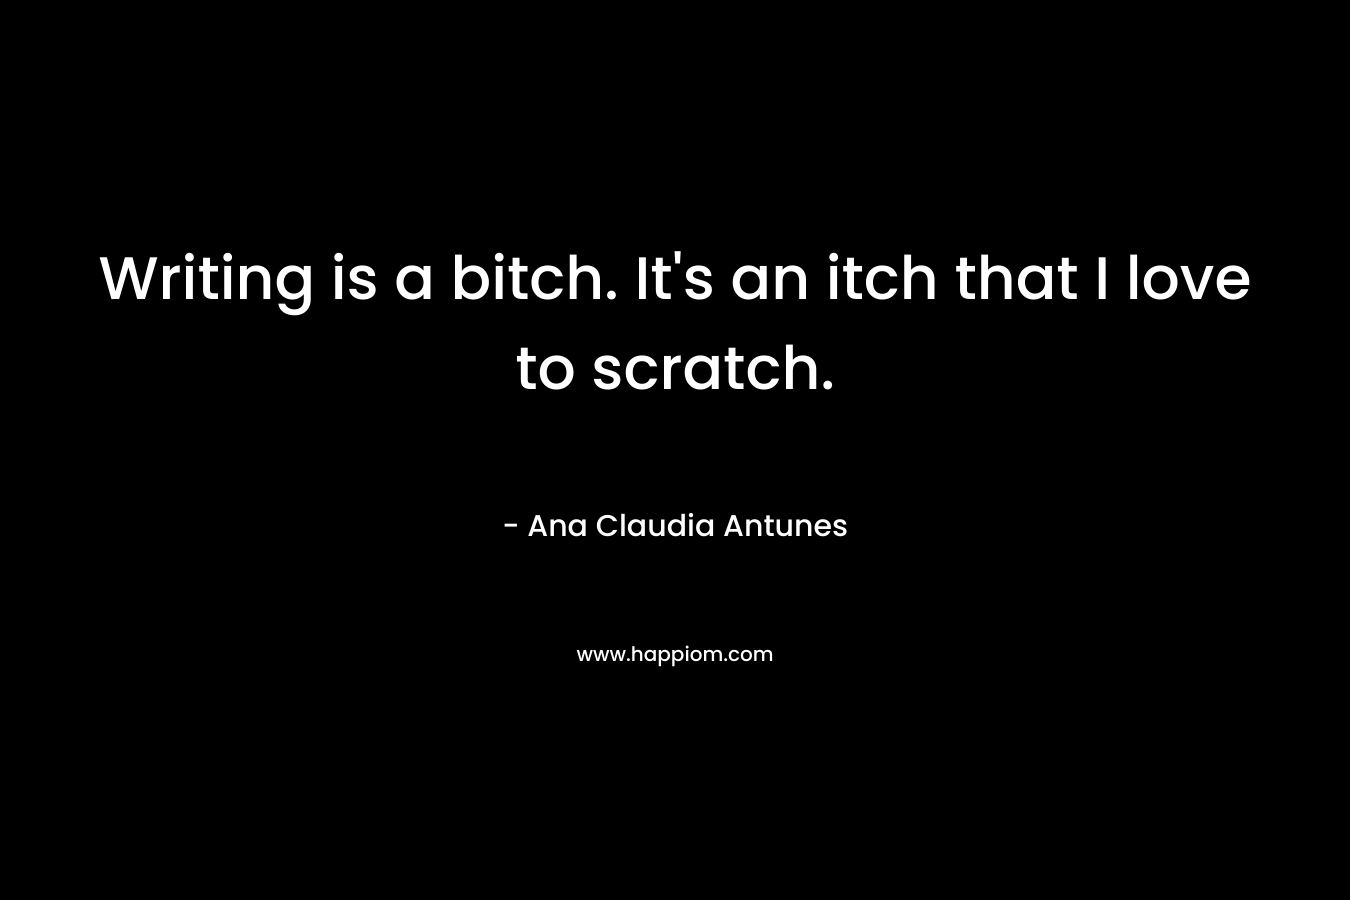 Writing is a bitch. It’s an itch that I love to scratch. – Ana Claudia Antunes